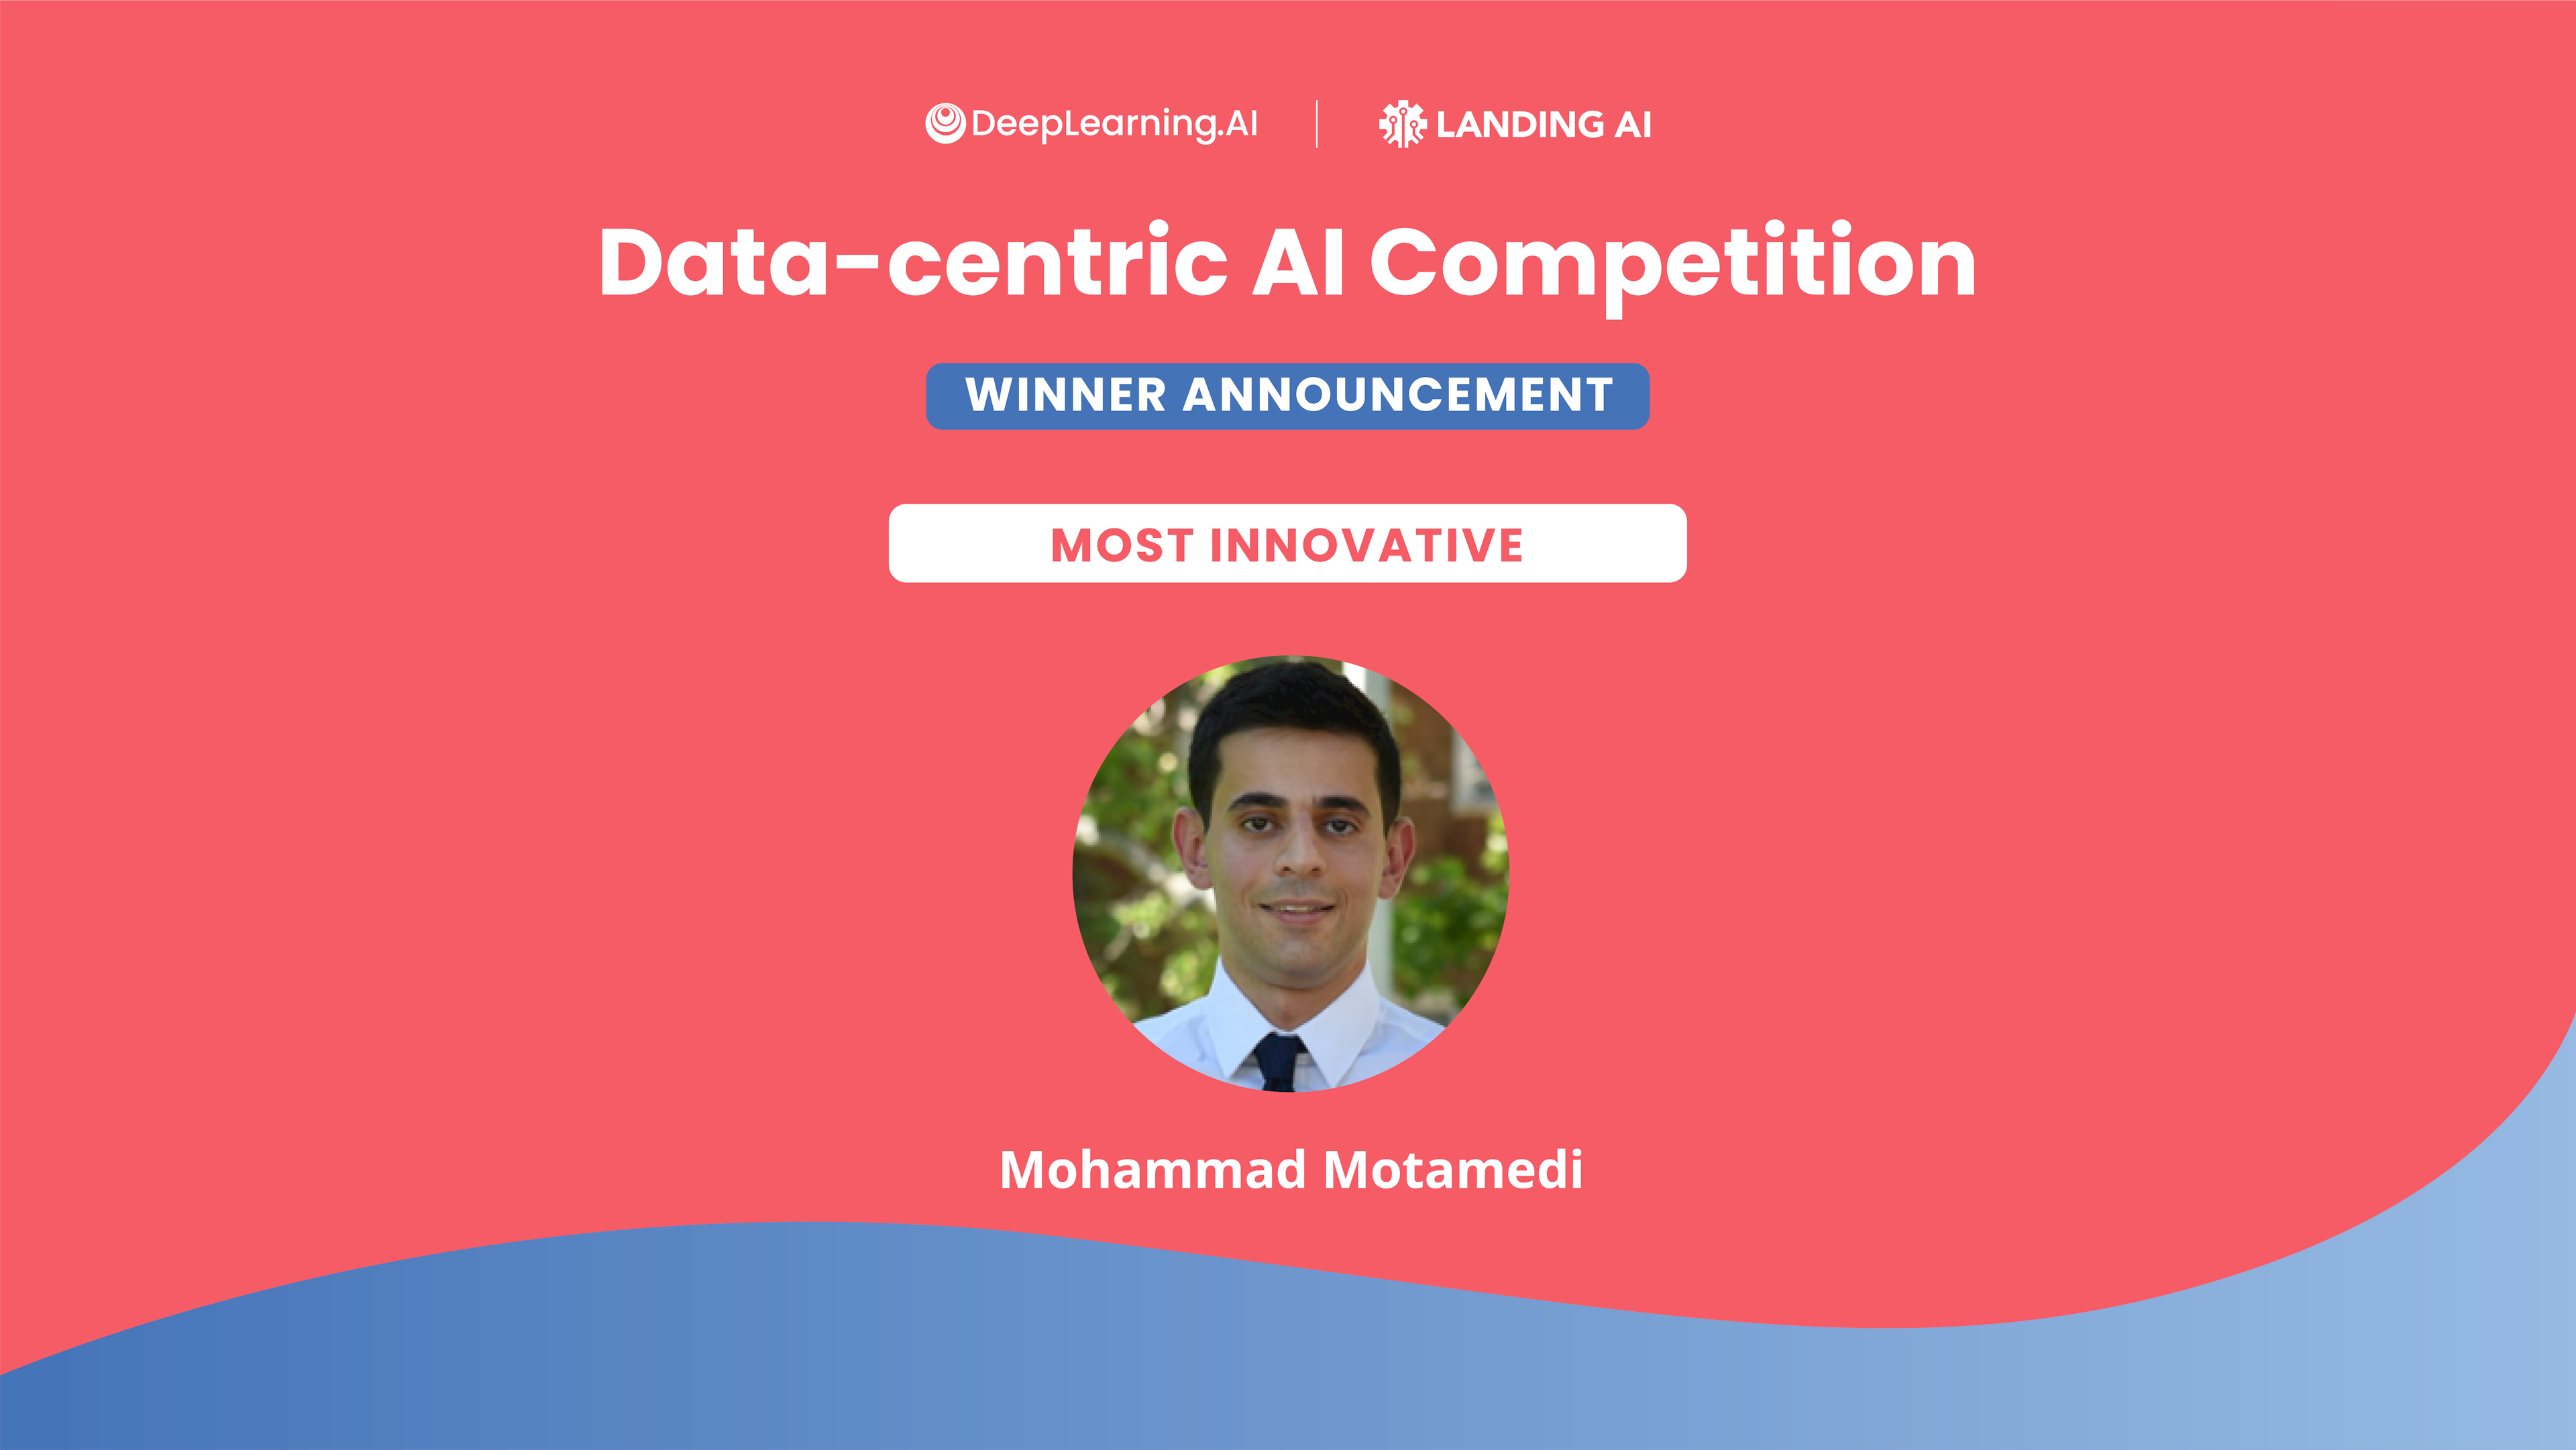 How I Won the First Data-centric AI Competition: Mohammad Motamedi